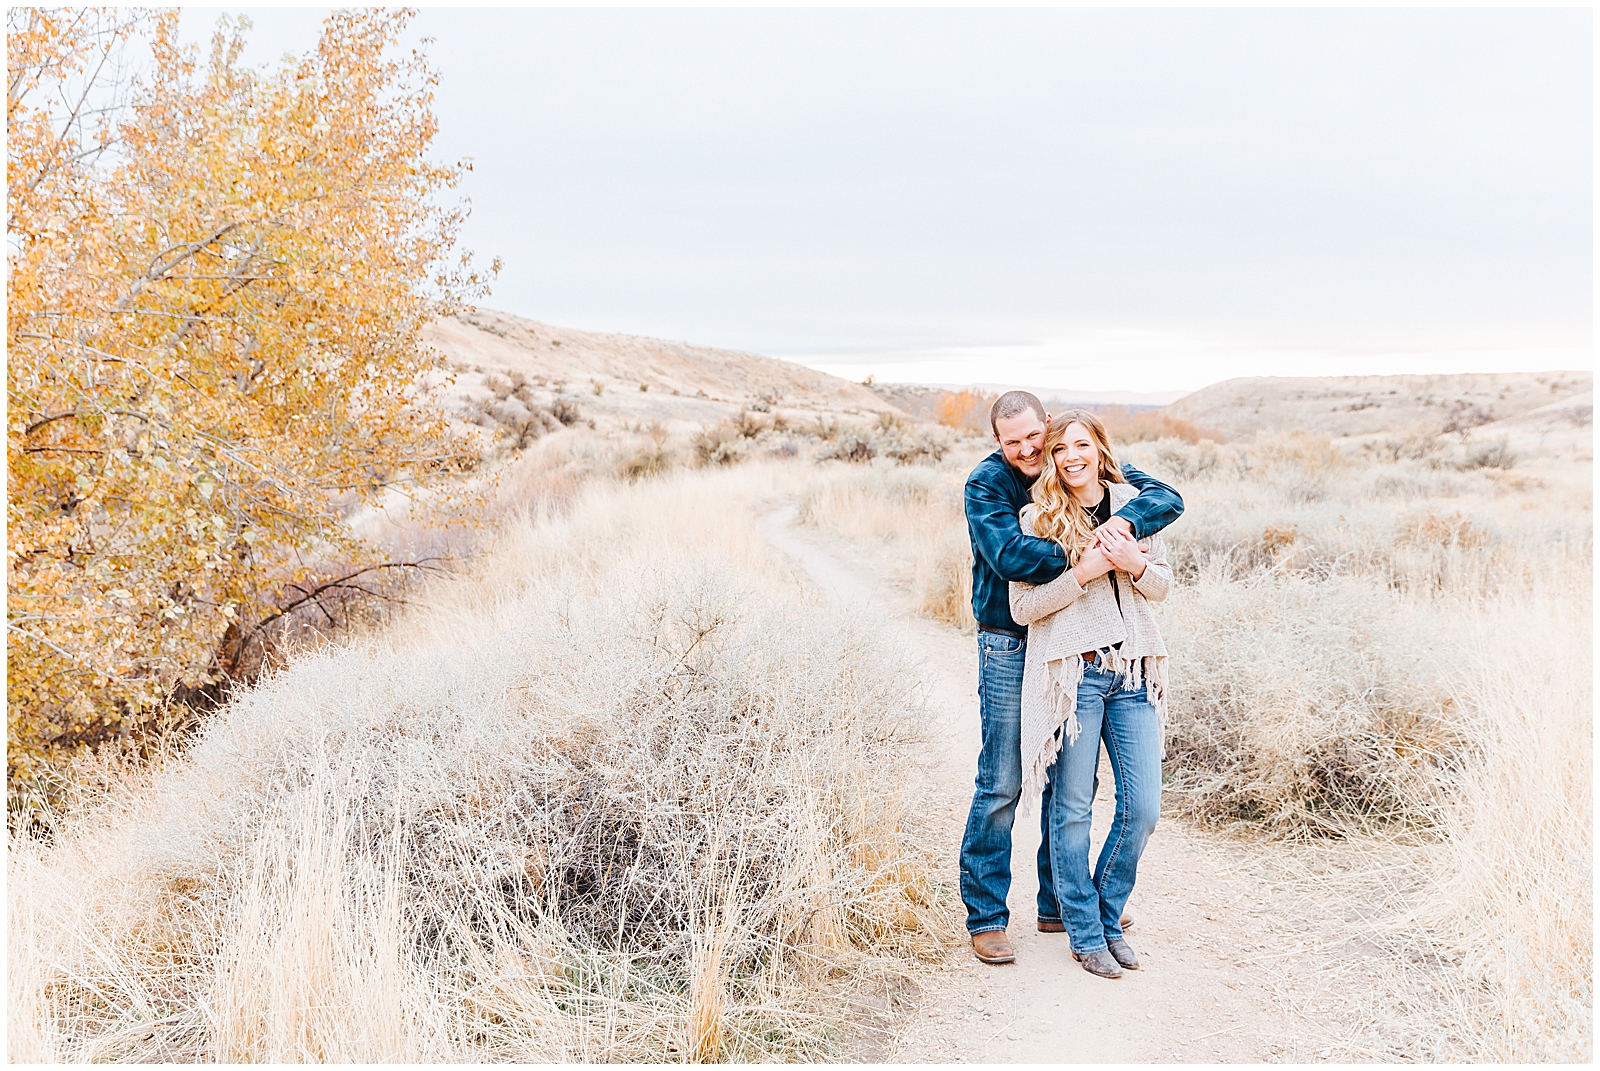 October Foothills Rustic Engagement Session